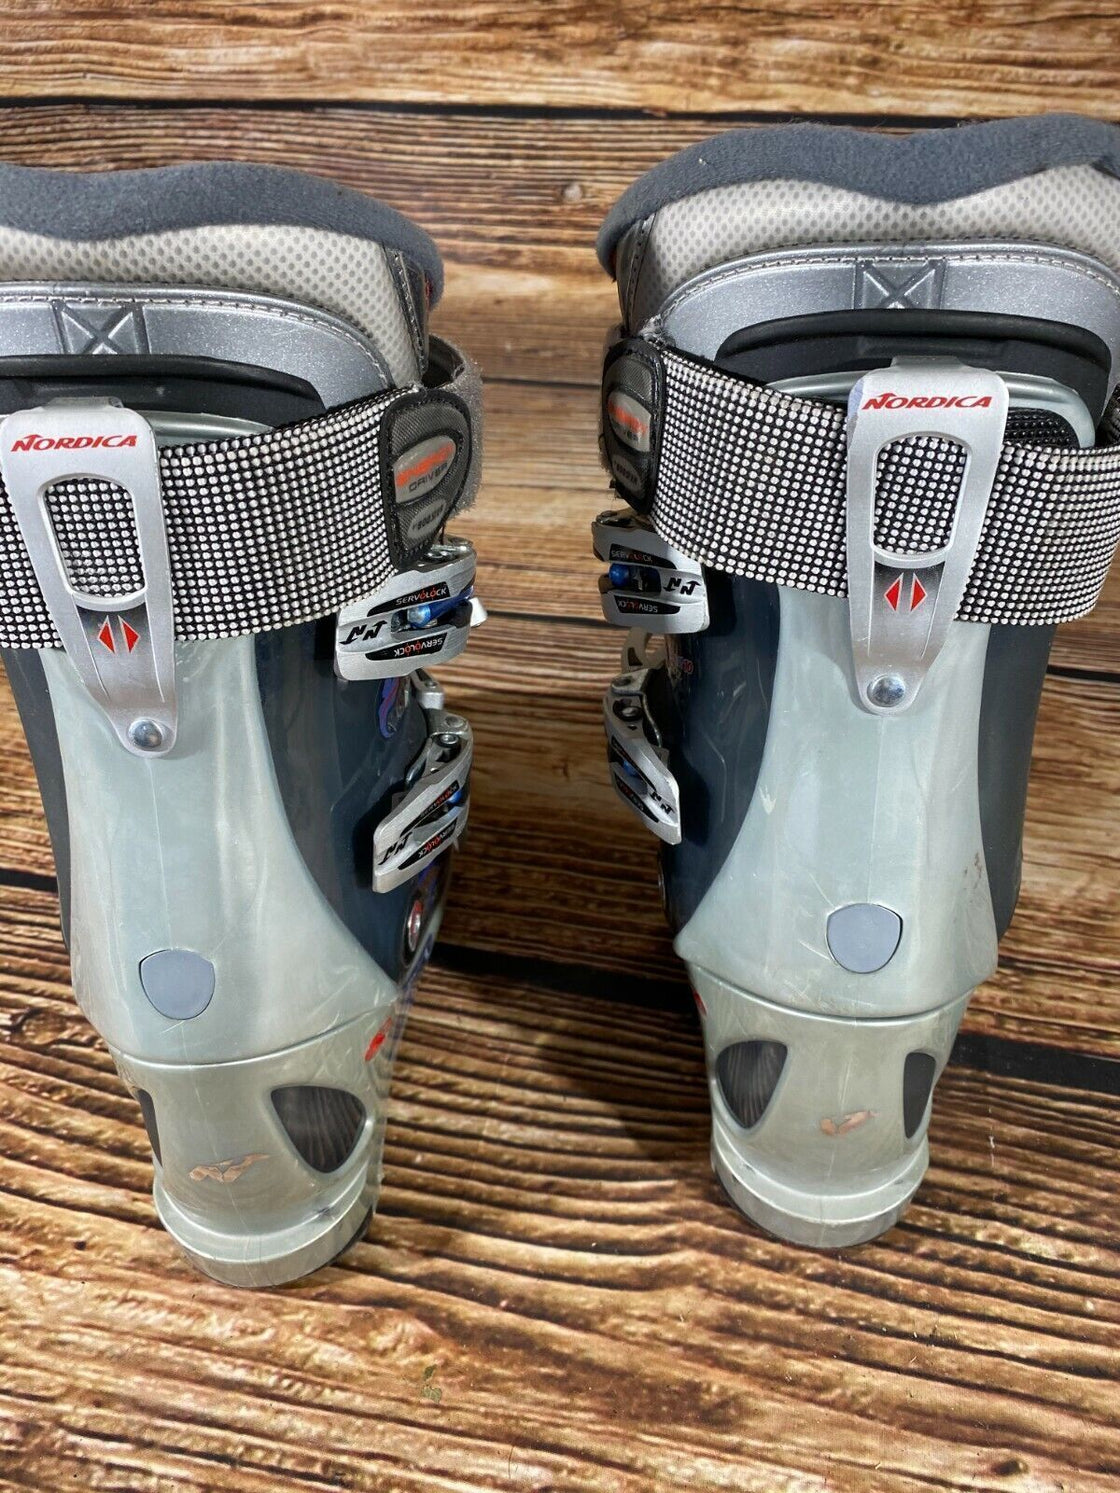 NORDICA Olympia Beast 10 Alpine Ski Boots Mountain Skiing Boots Size 230 - 235